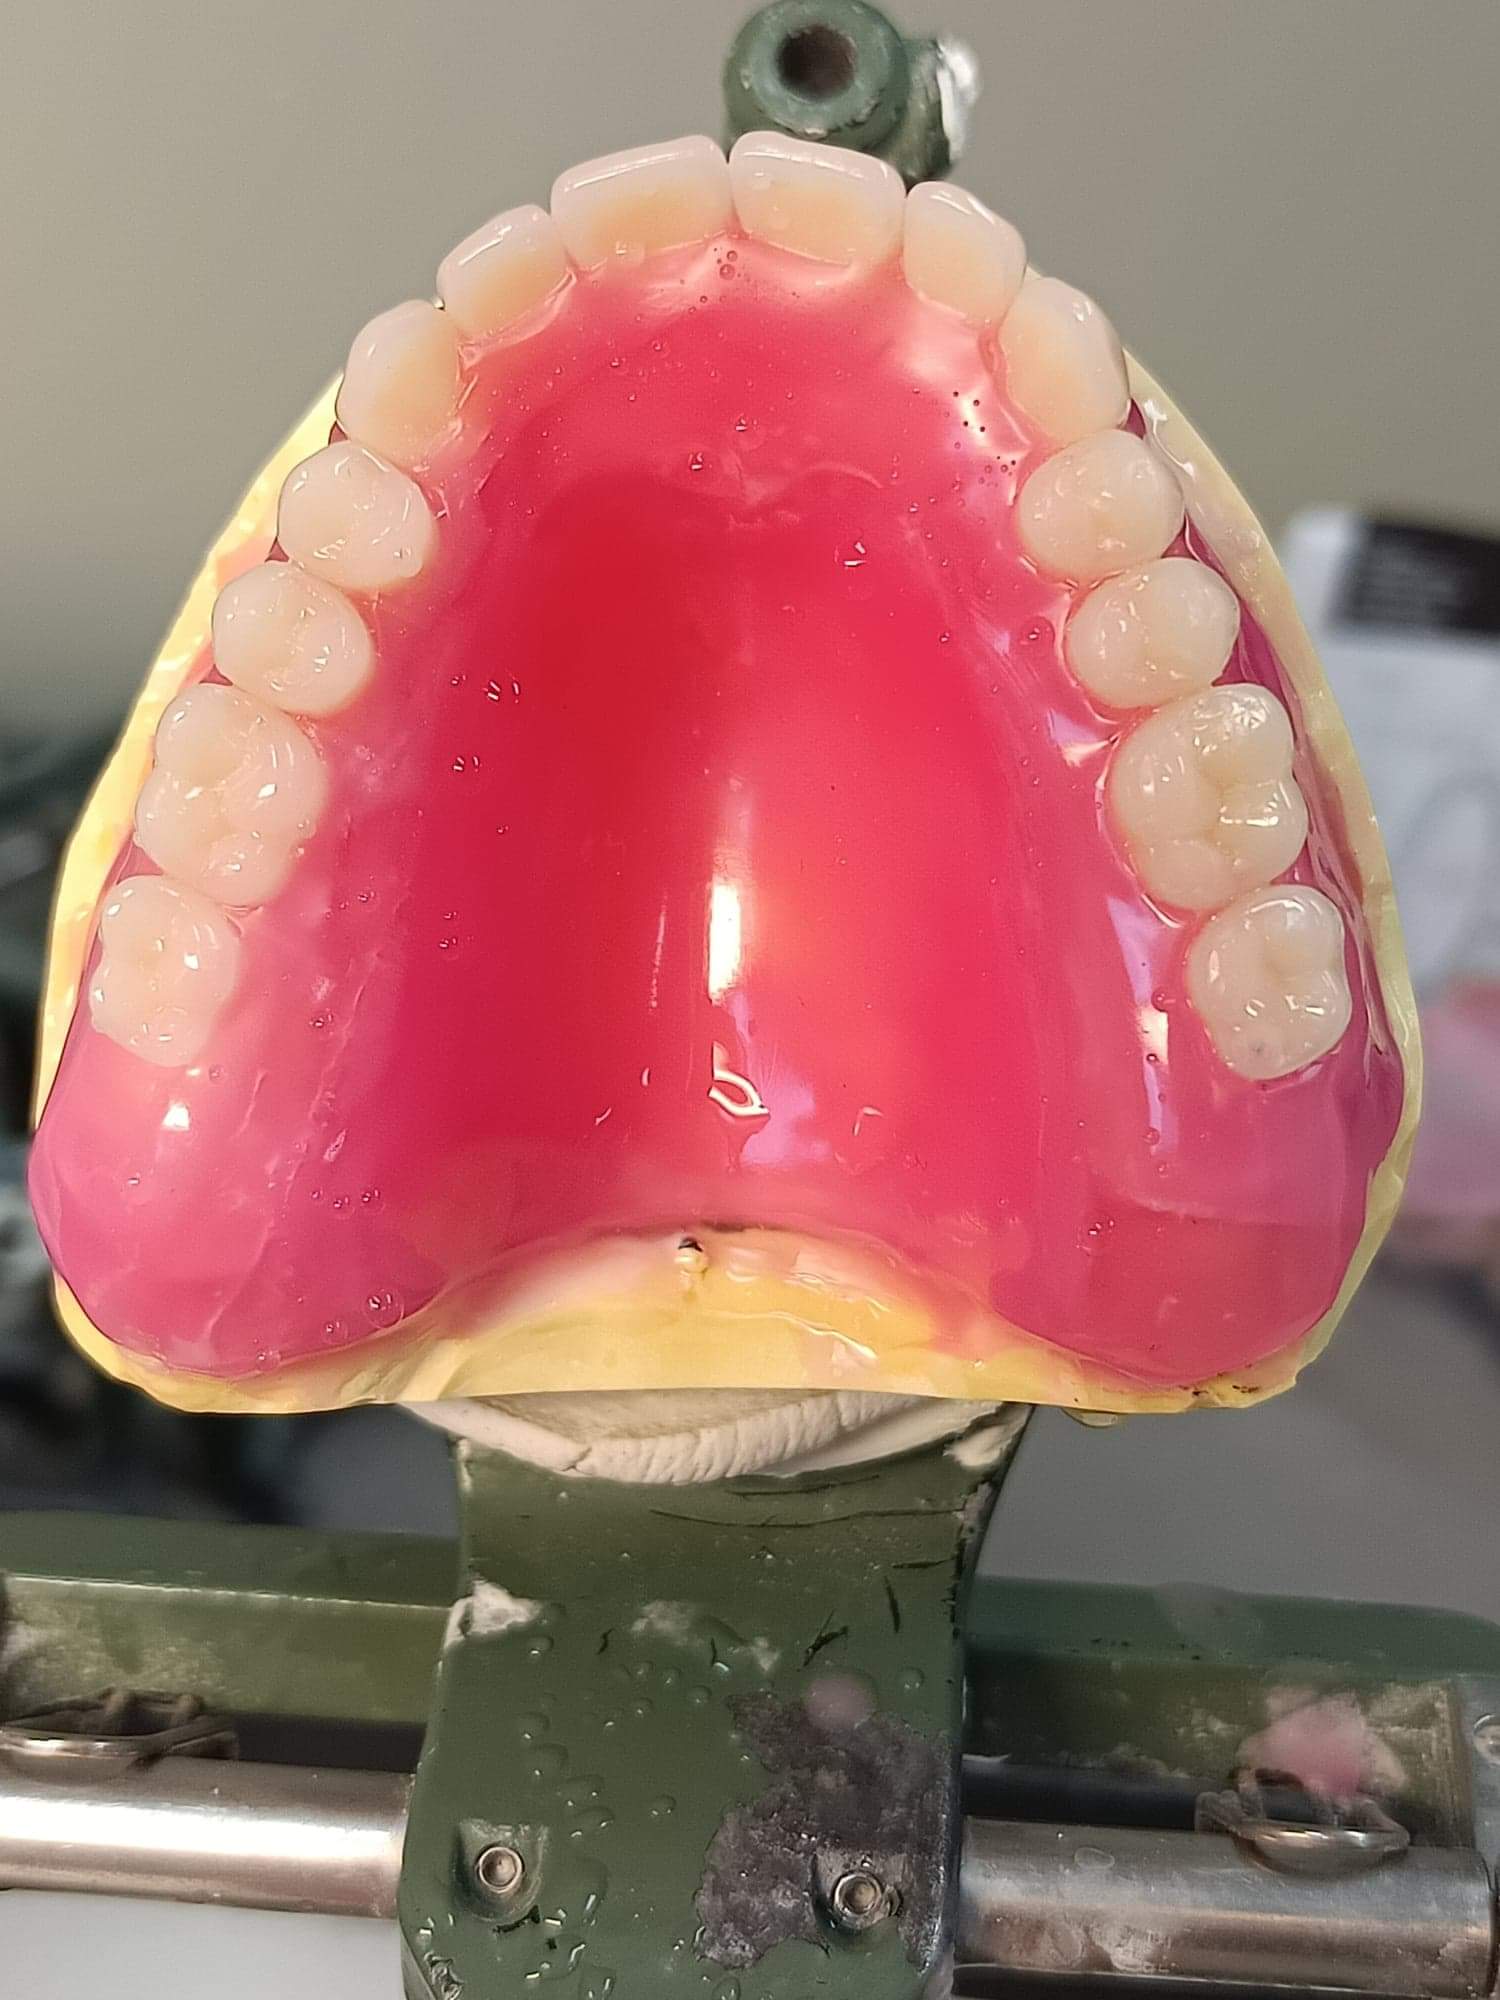 Best Denture Picture With The Focus On Teeth — Local Denture Clinic in Sunshine Coast, QLD